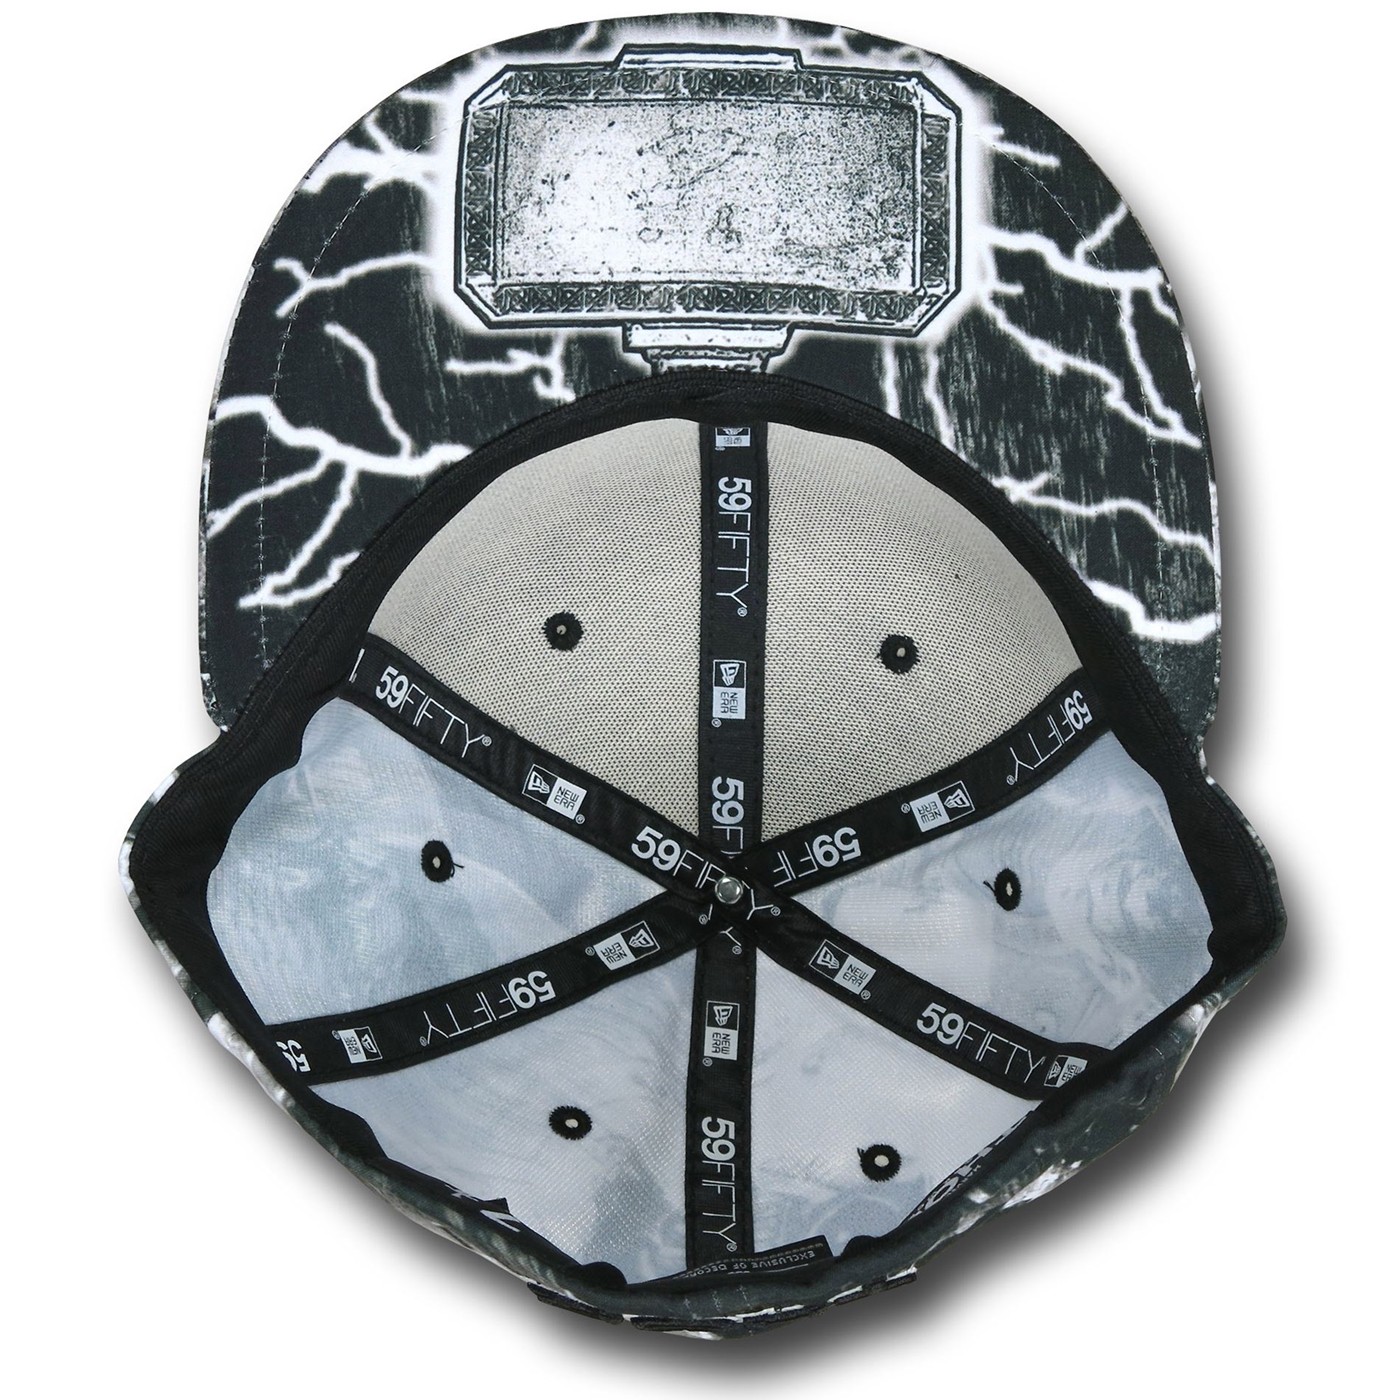 Thor All Over Print 59Fifty Cap